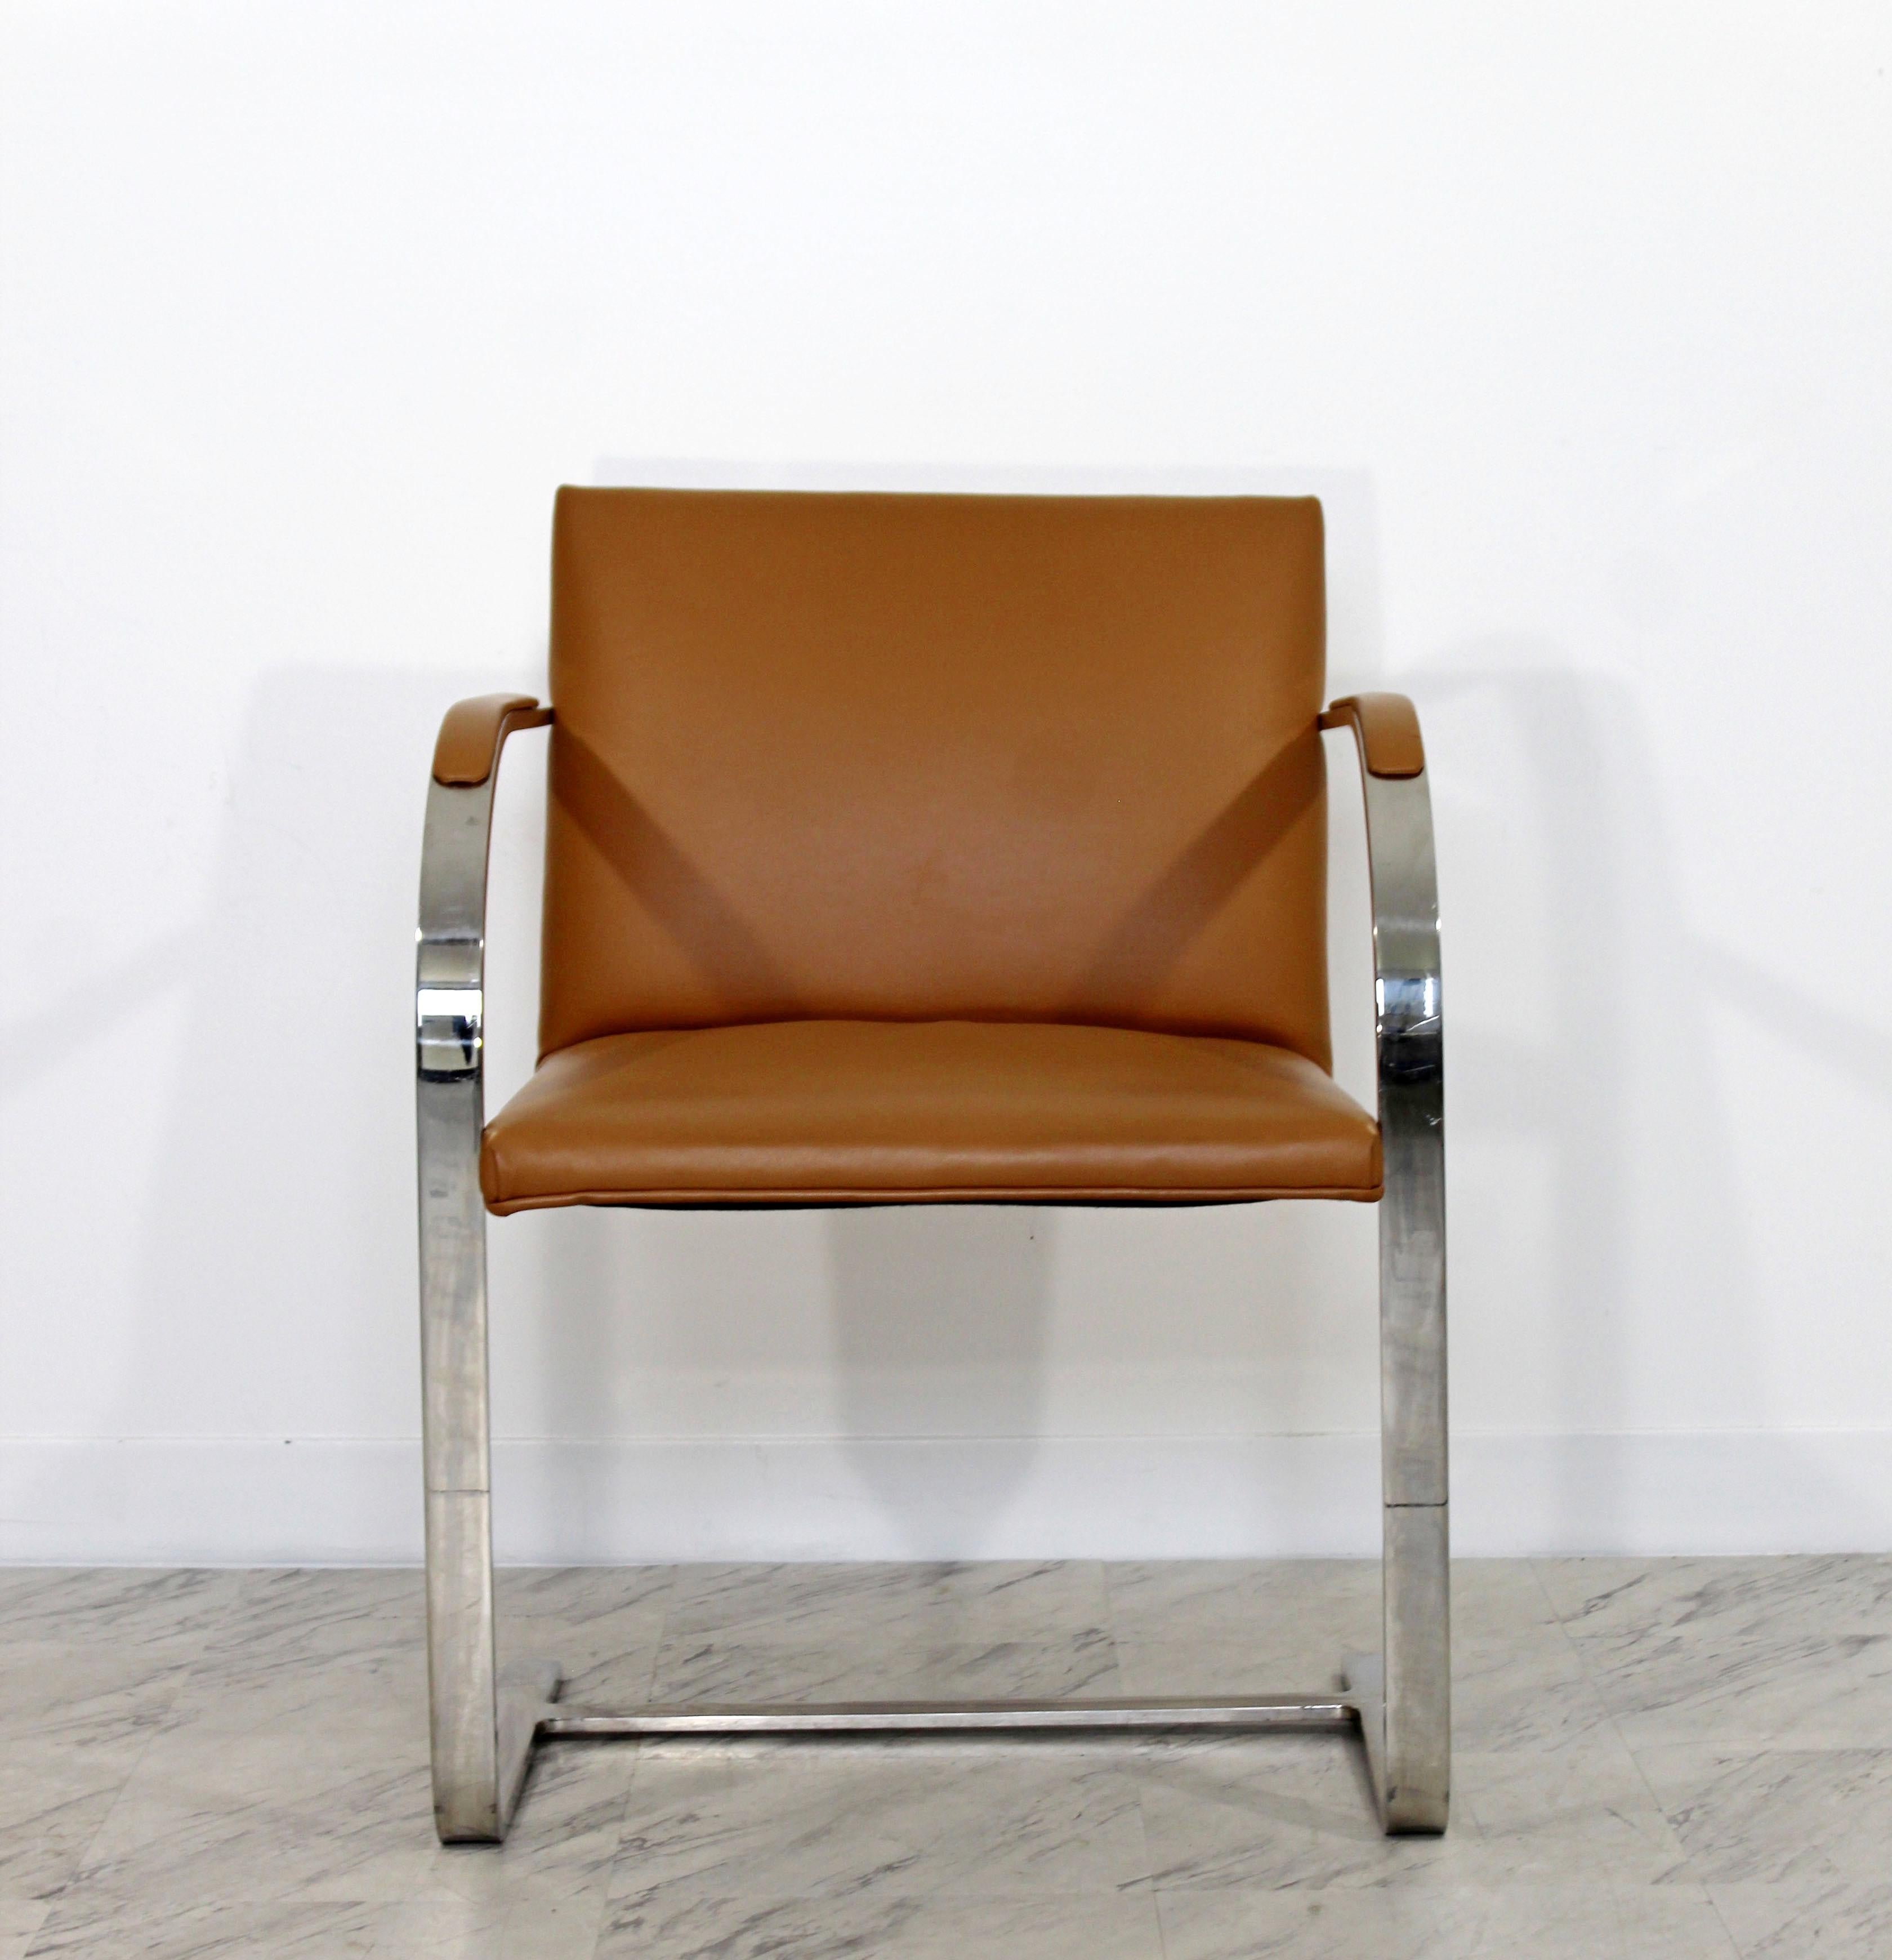 For your consideration is a phenomenal, single, cantilever, flat bar chrome armchair, in the style of Mies Van der Rohe for BRNO, circa the 1970s. In excellent condition. The dimensions are 22.5